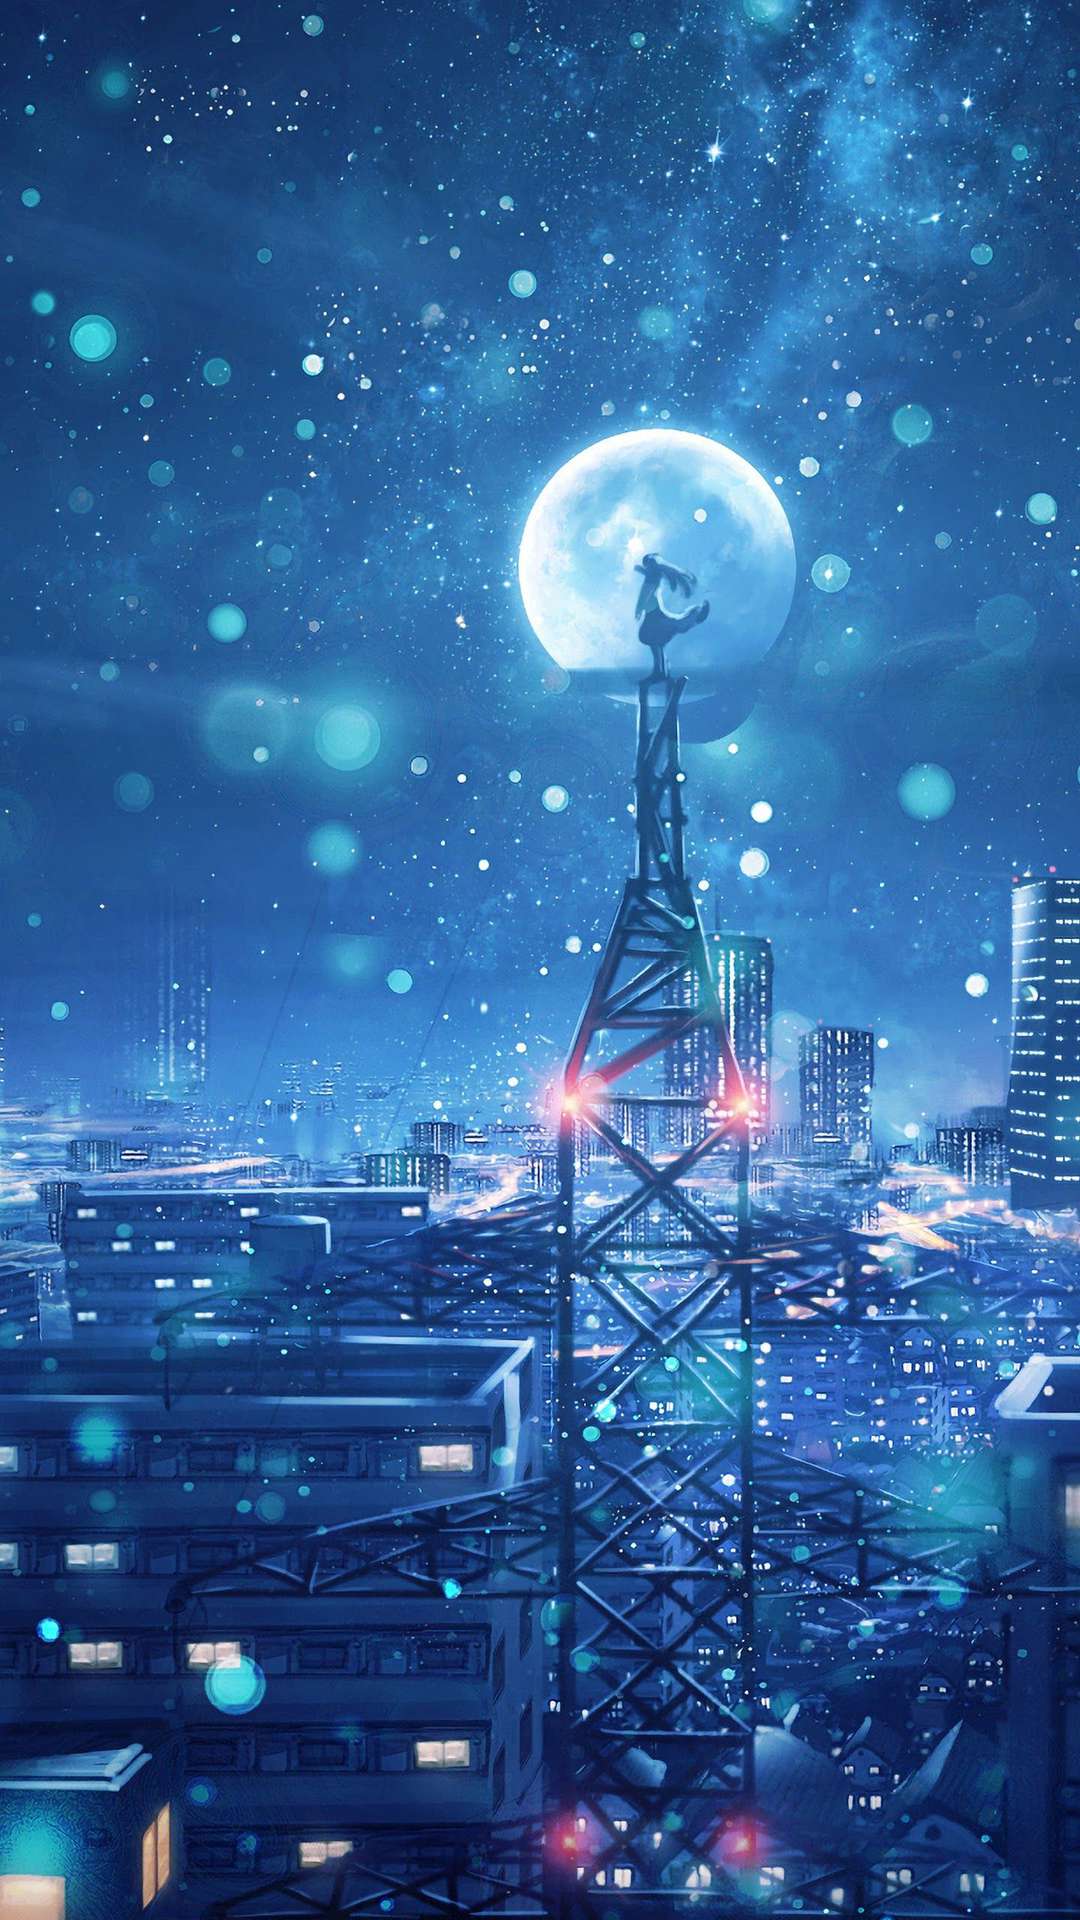 37+ Anime City Wallpapers for iPhone and Android by Heidi Simmons